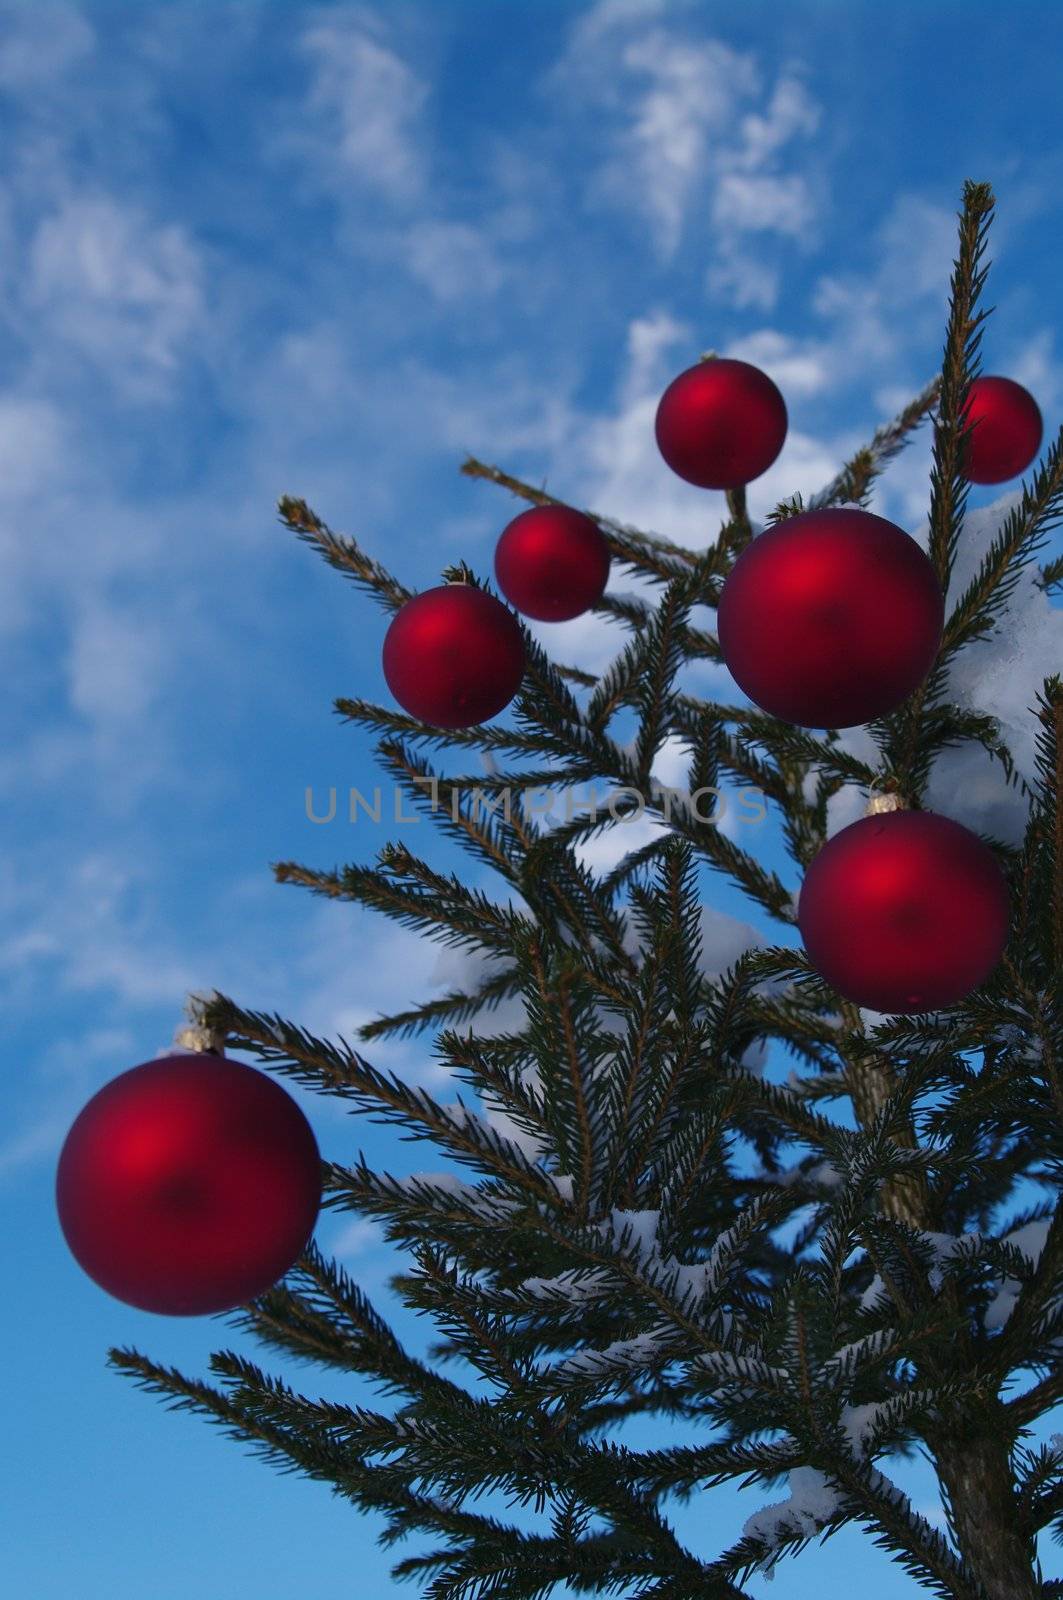 baubles  on a Christmas tree outside in a snowy landscape